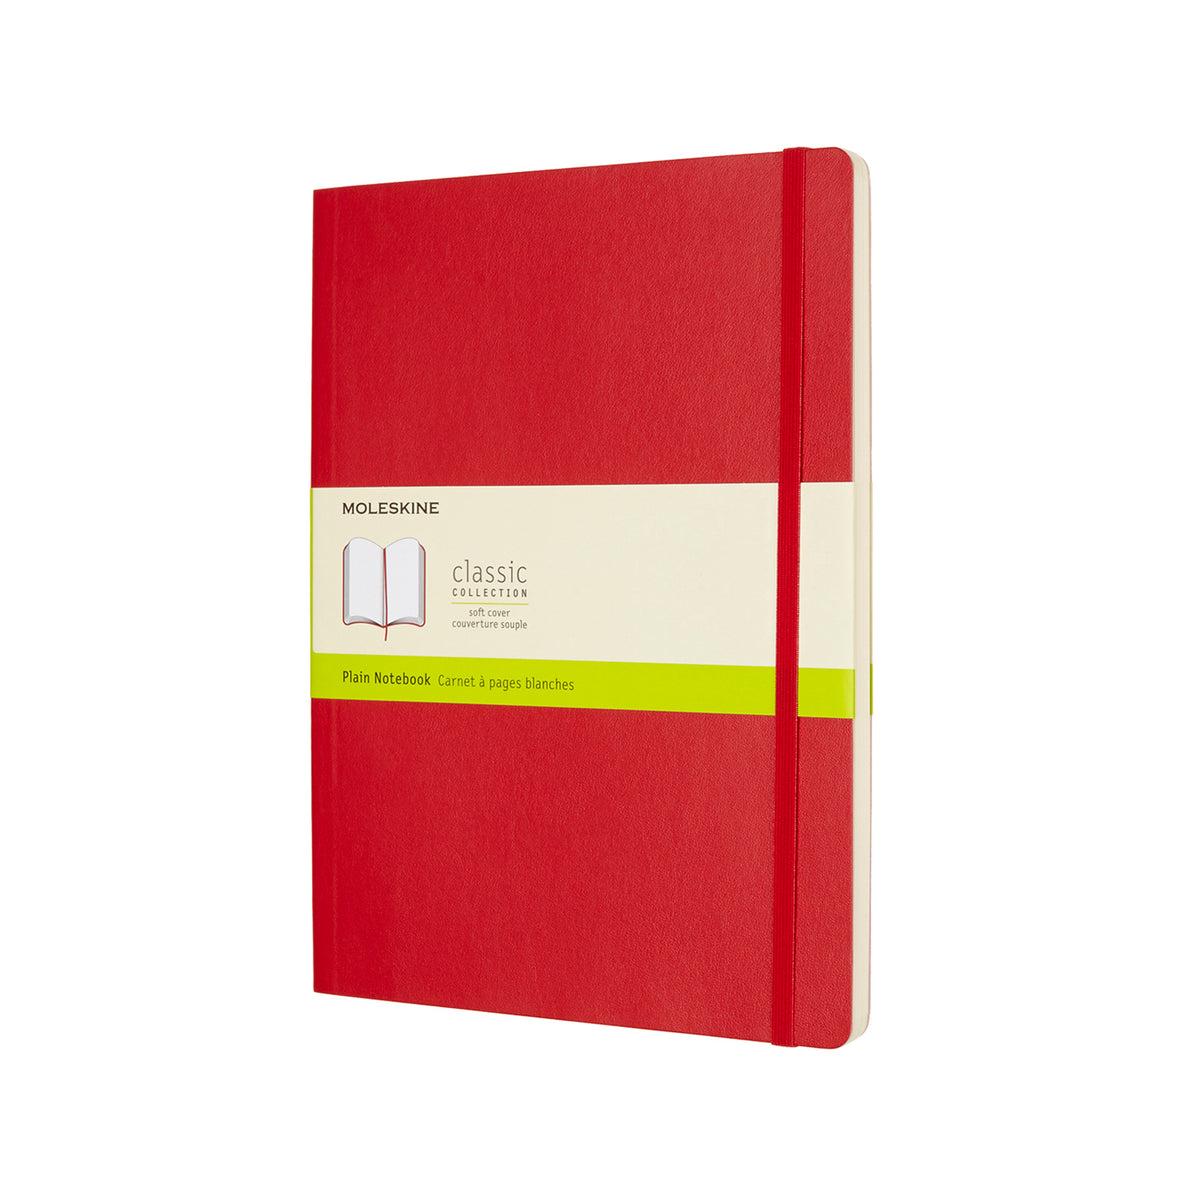 Moleskine - Classic Soft Cover Notebook - Plain - Extra Large - Scarlet Red